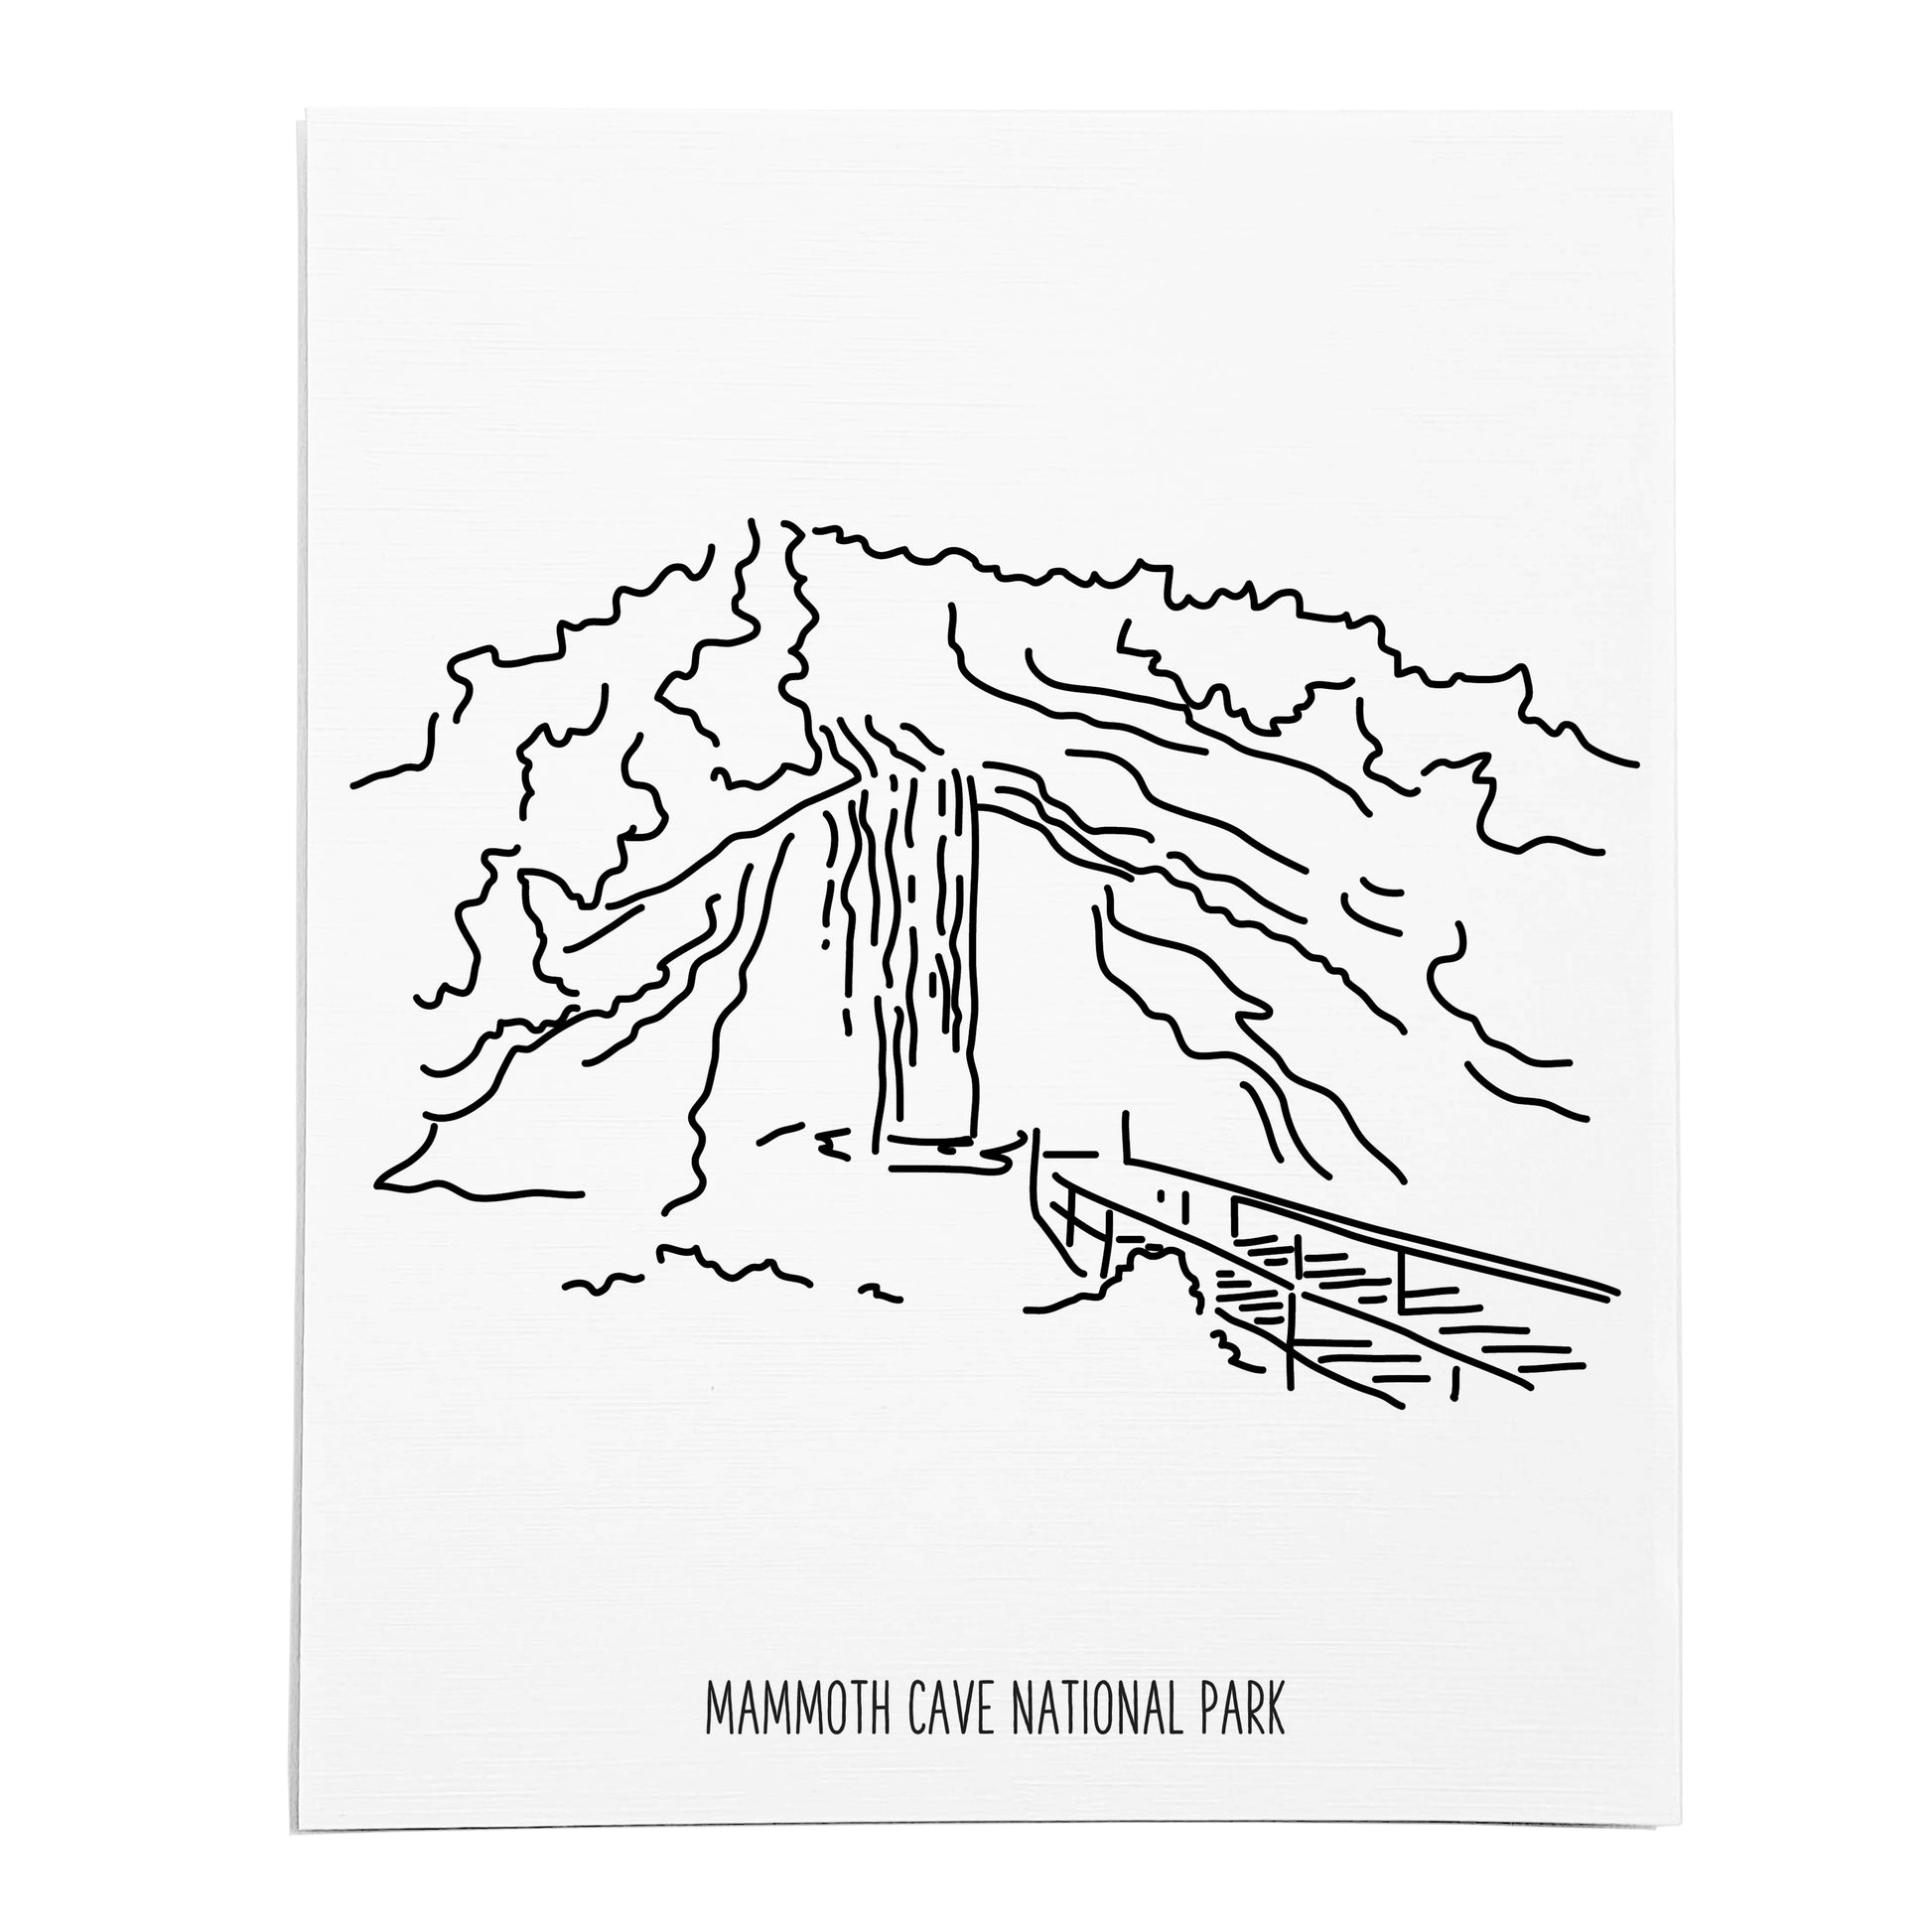 An art print featuring a line drawing of Mammoth Cave National Park on white linen paper